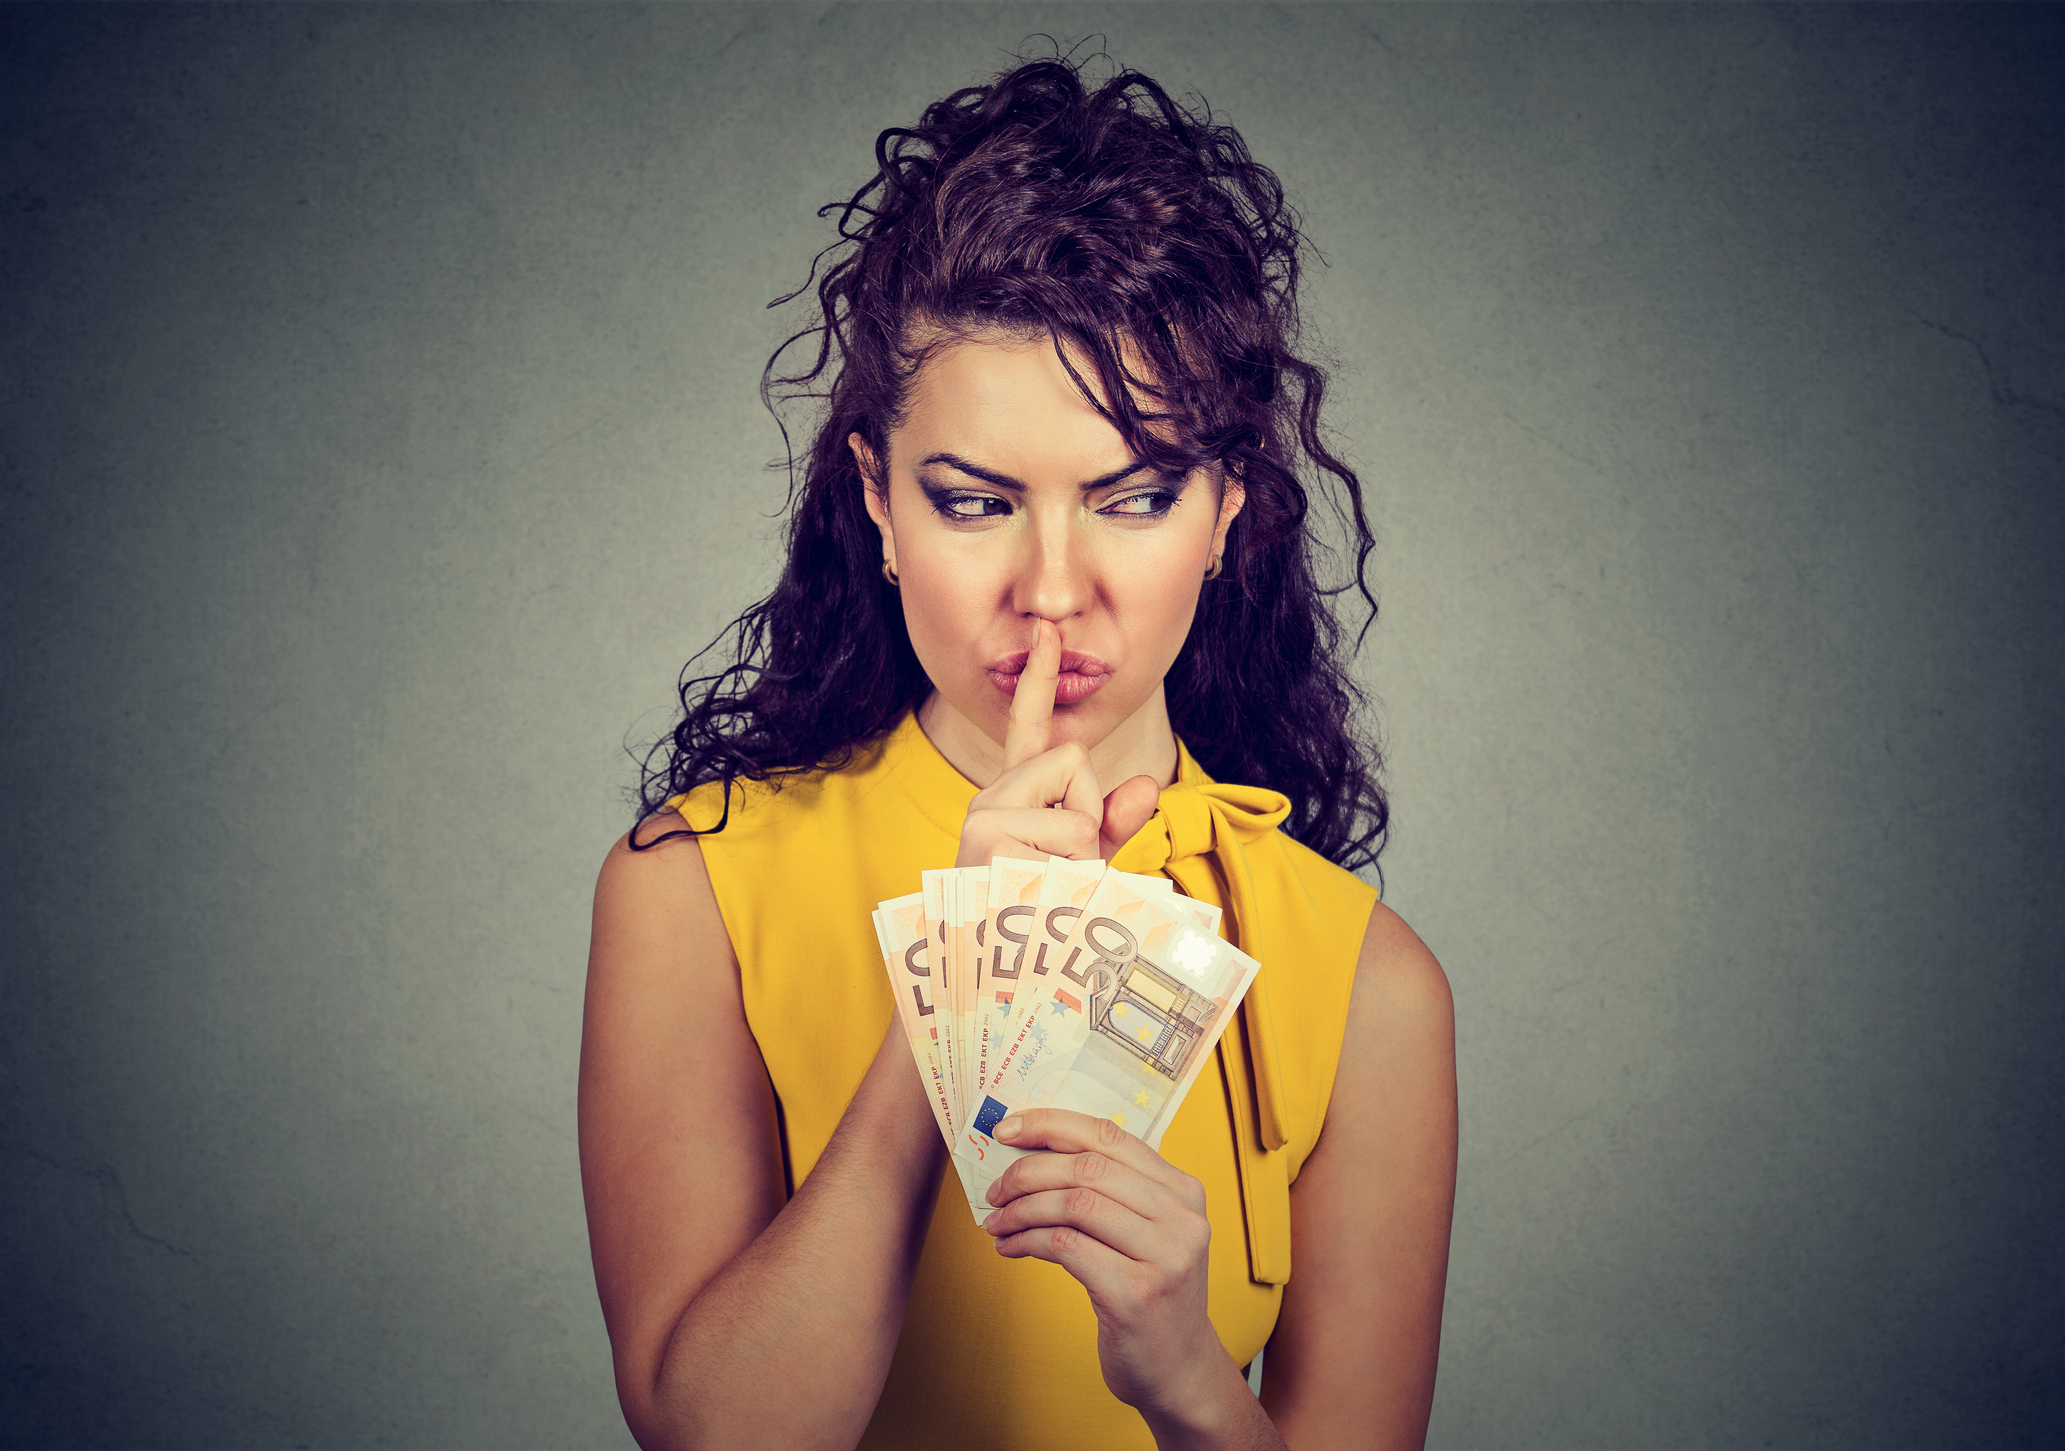 Woman holding pile of money and asking for silence.